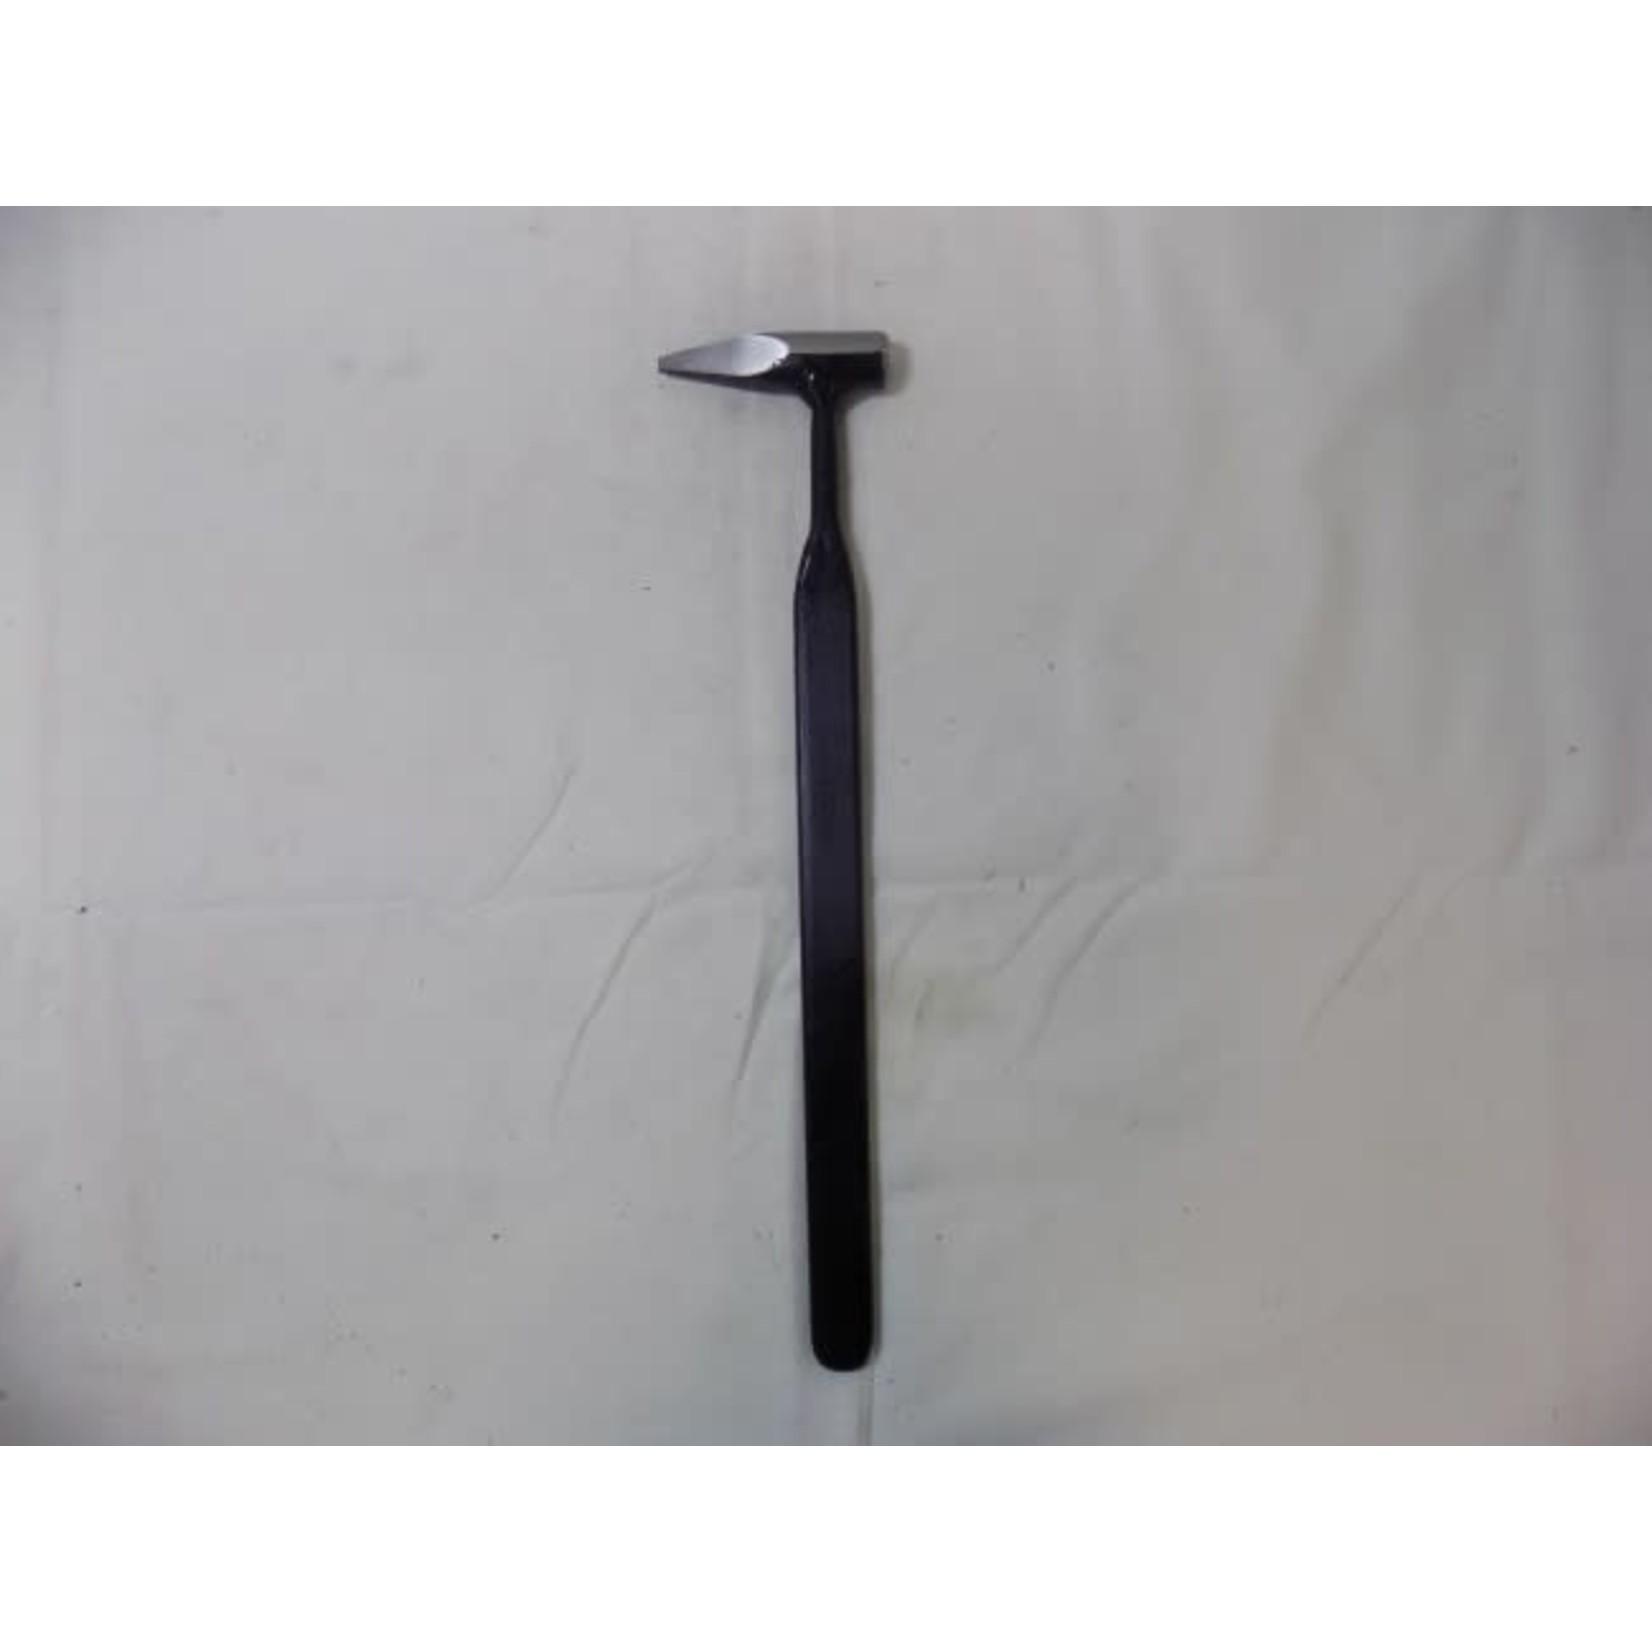 Anvil Brand AB City steel handle forepunch